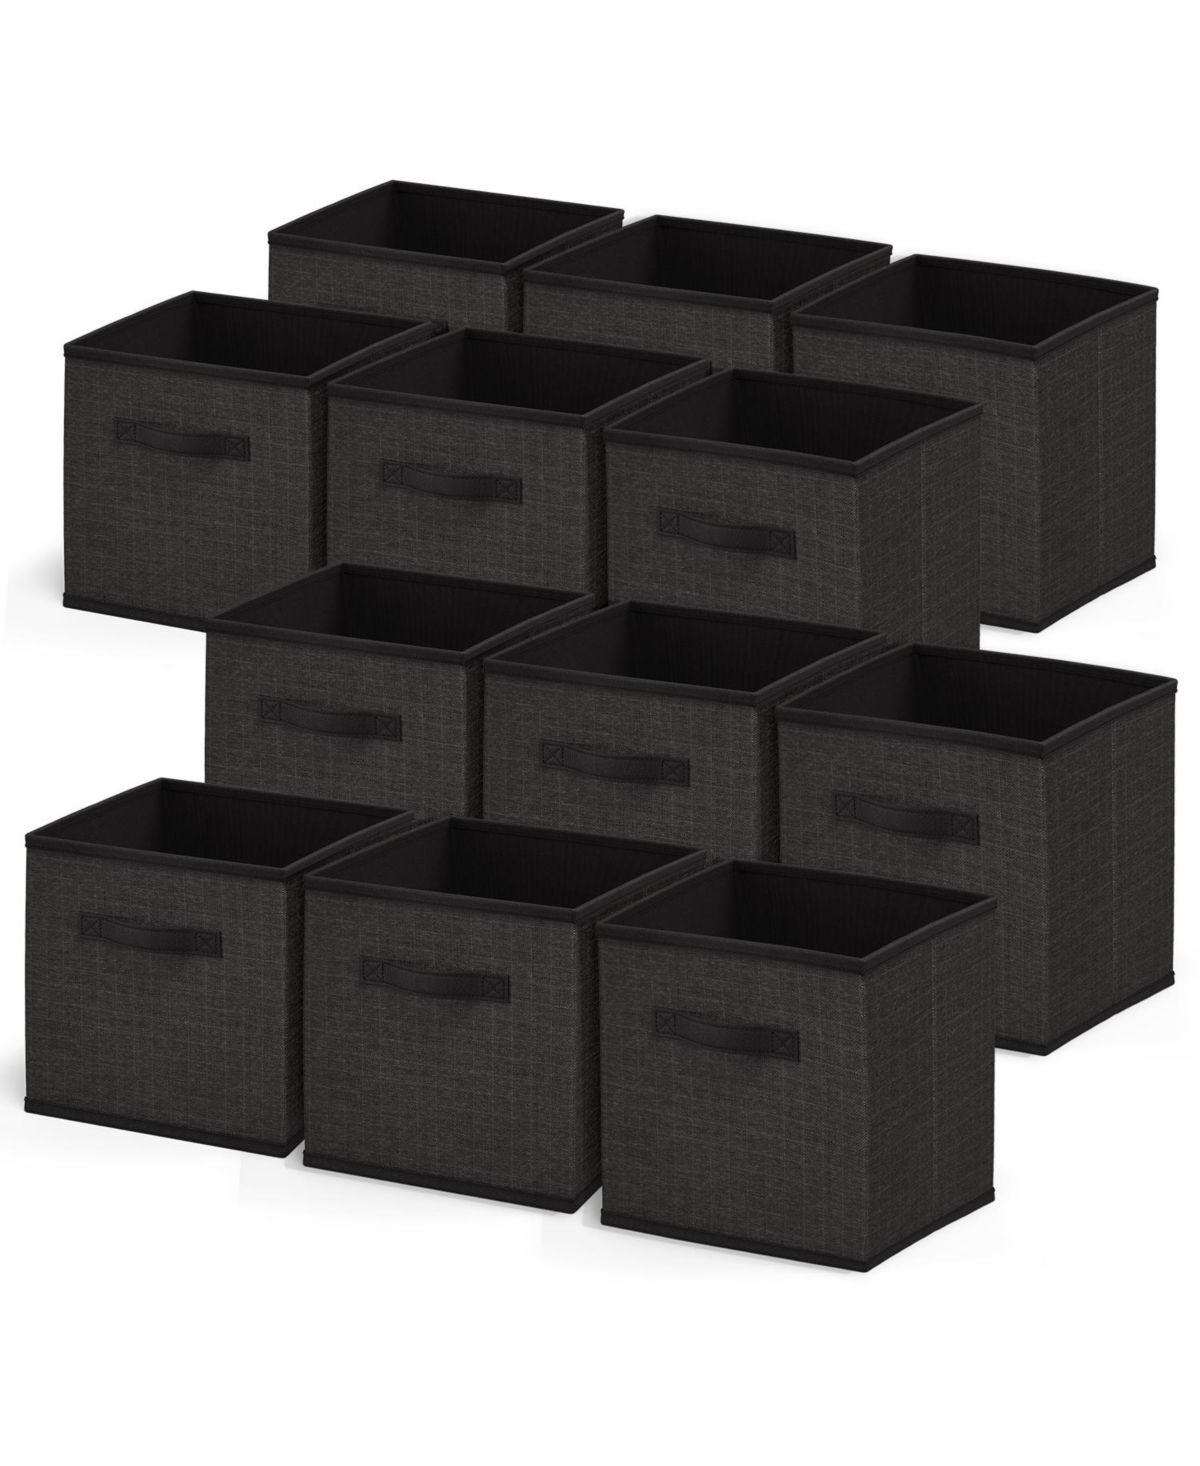 Foldable Fabric Cube Storage Bins with Handles - 12 Pack - Grey